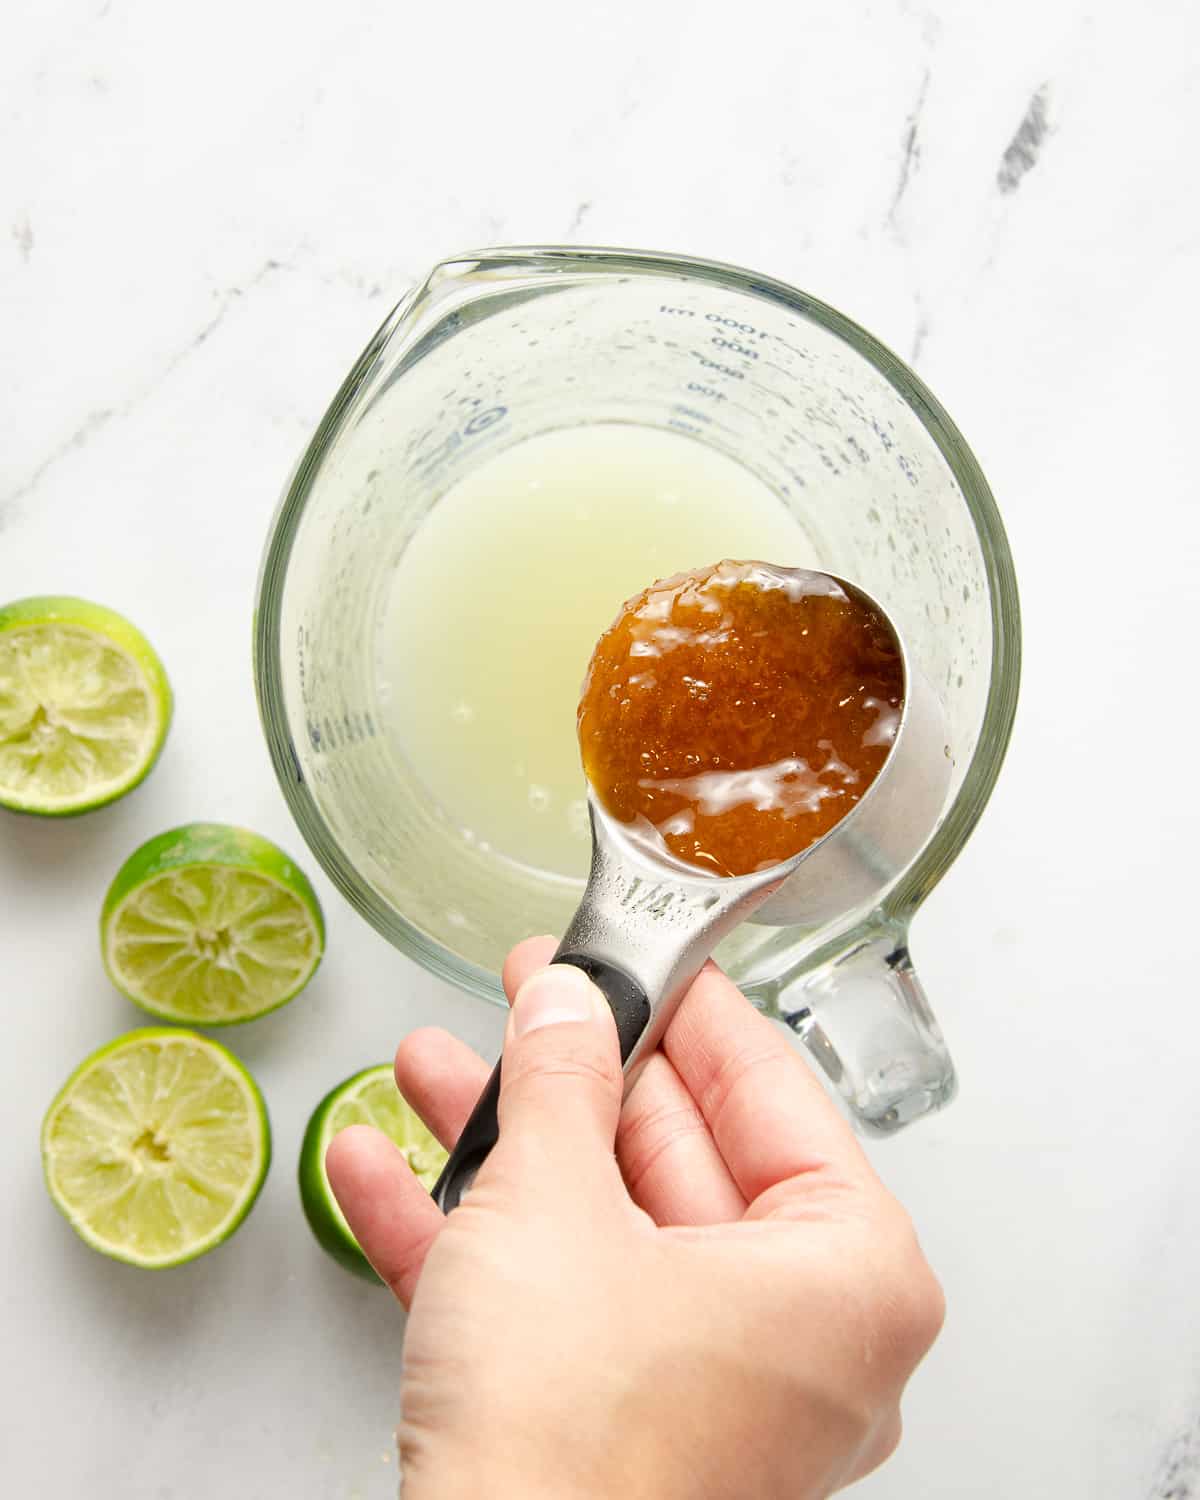 A hand pouring honey into a measuring cup filled with lime juice.